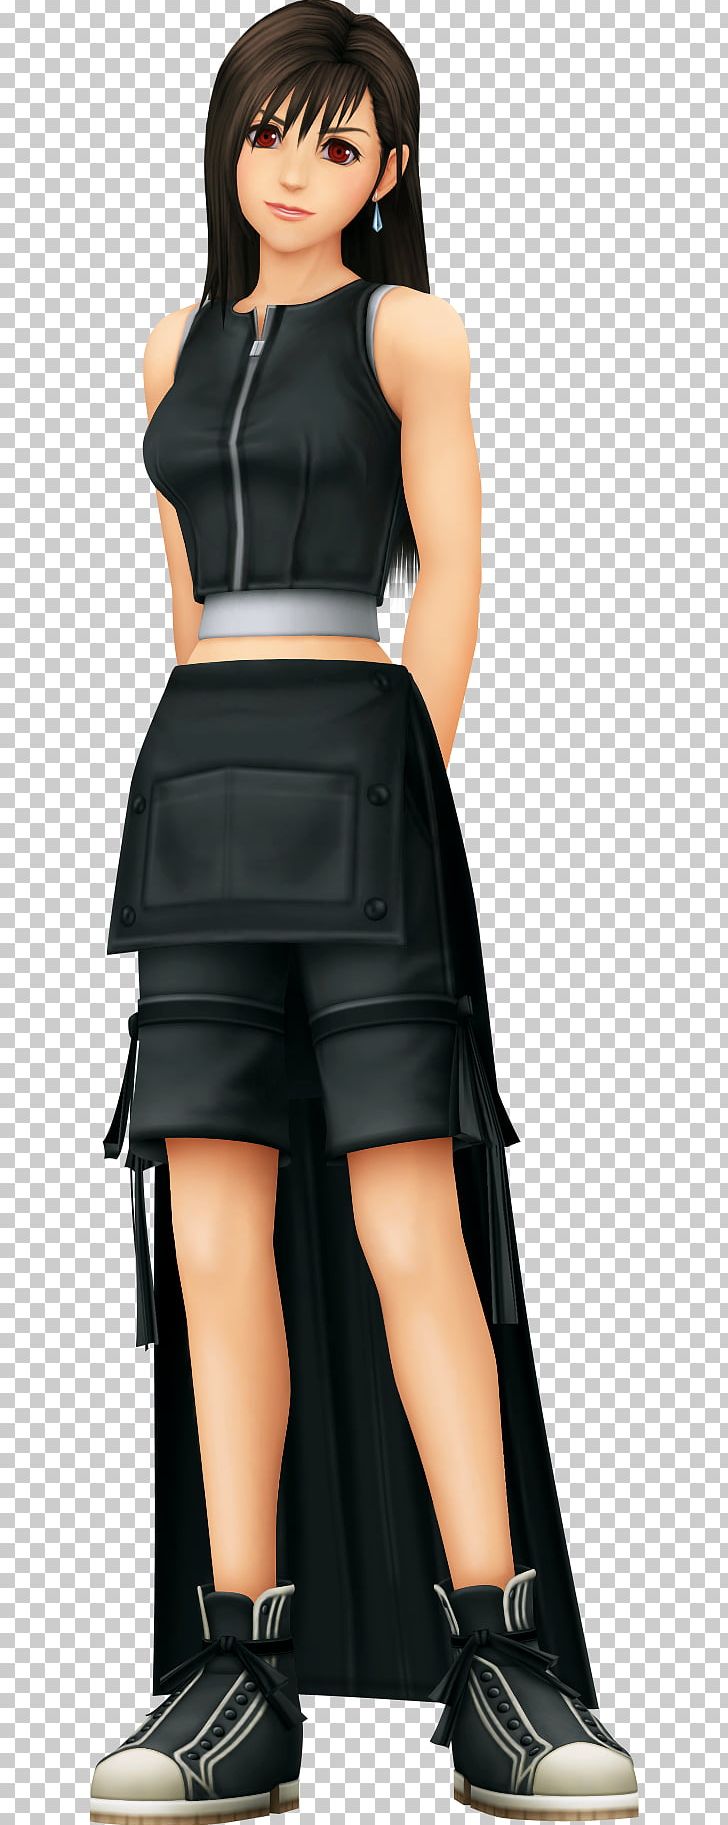 Kingdom Hearts II Final Fantasy VII: Advent Children Tifa Lockhart Cloud Strife PNG, Clipart, Aerith Gainsborough, Black, Characters Of Kingdom Hearts, Clothing, Cloud Strife Free PNG Download